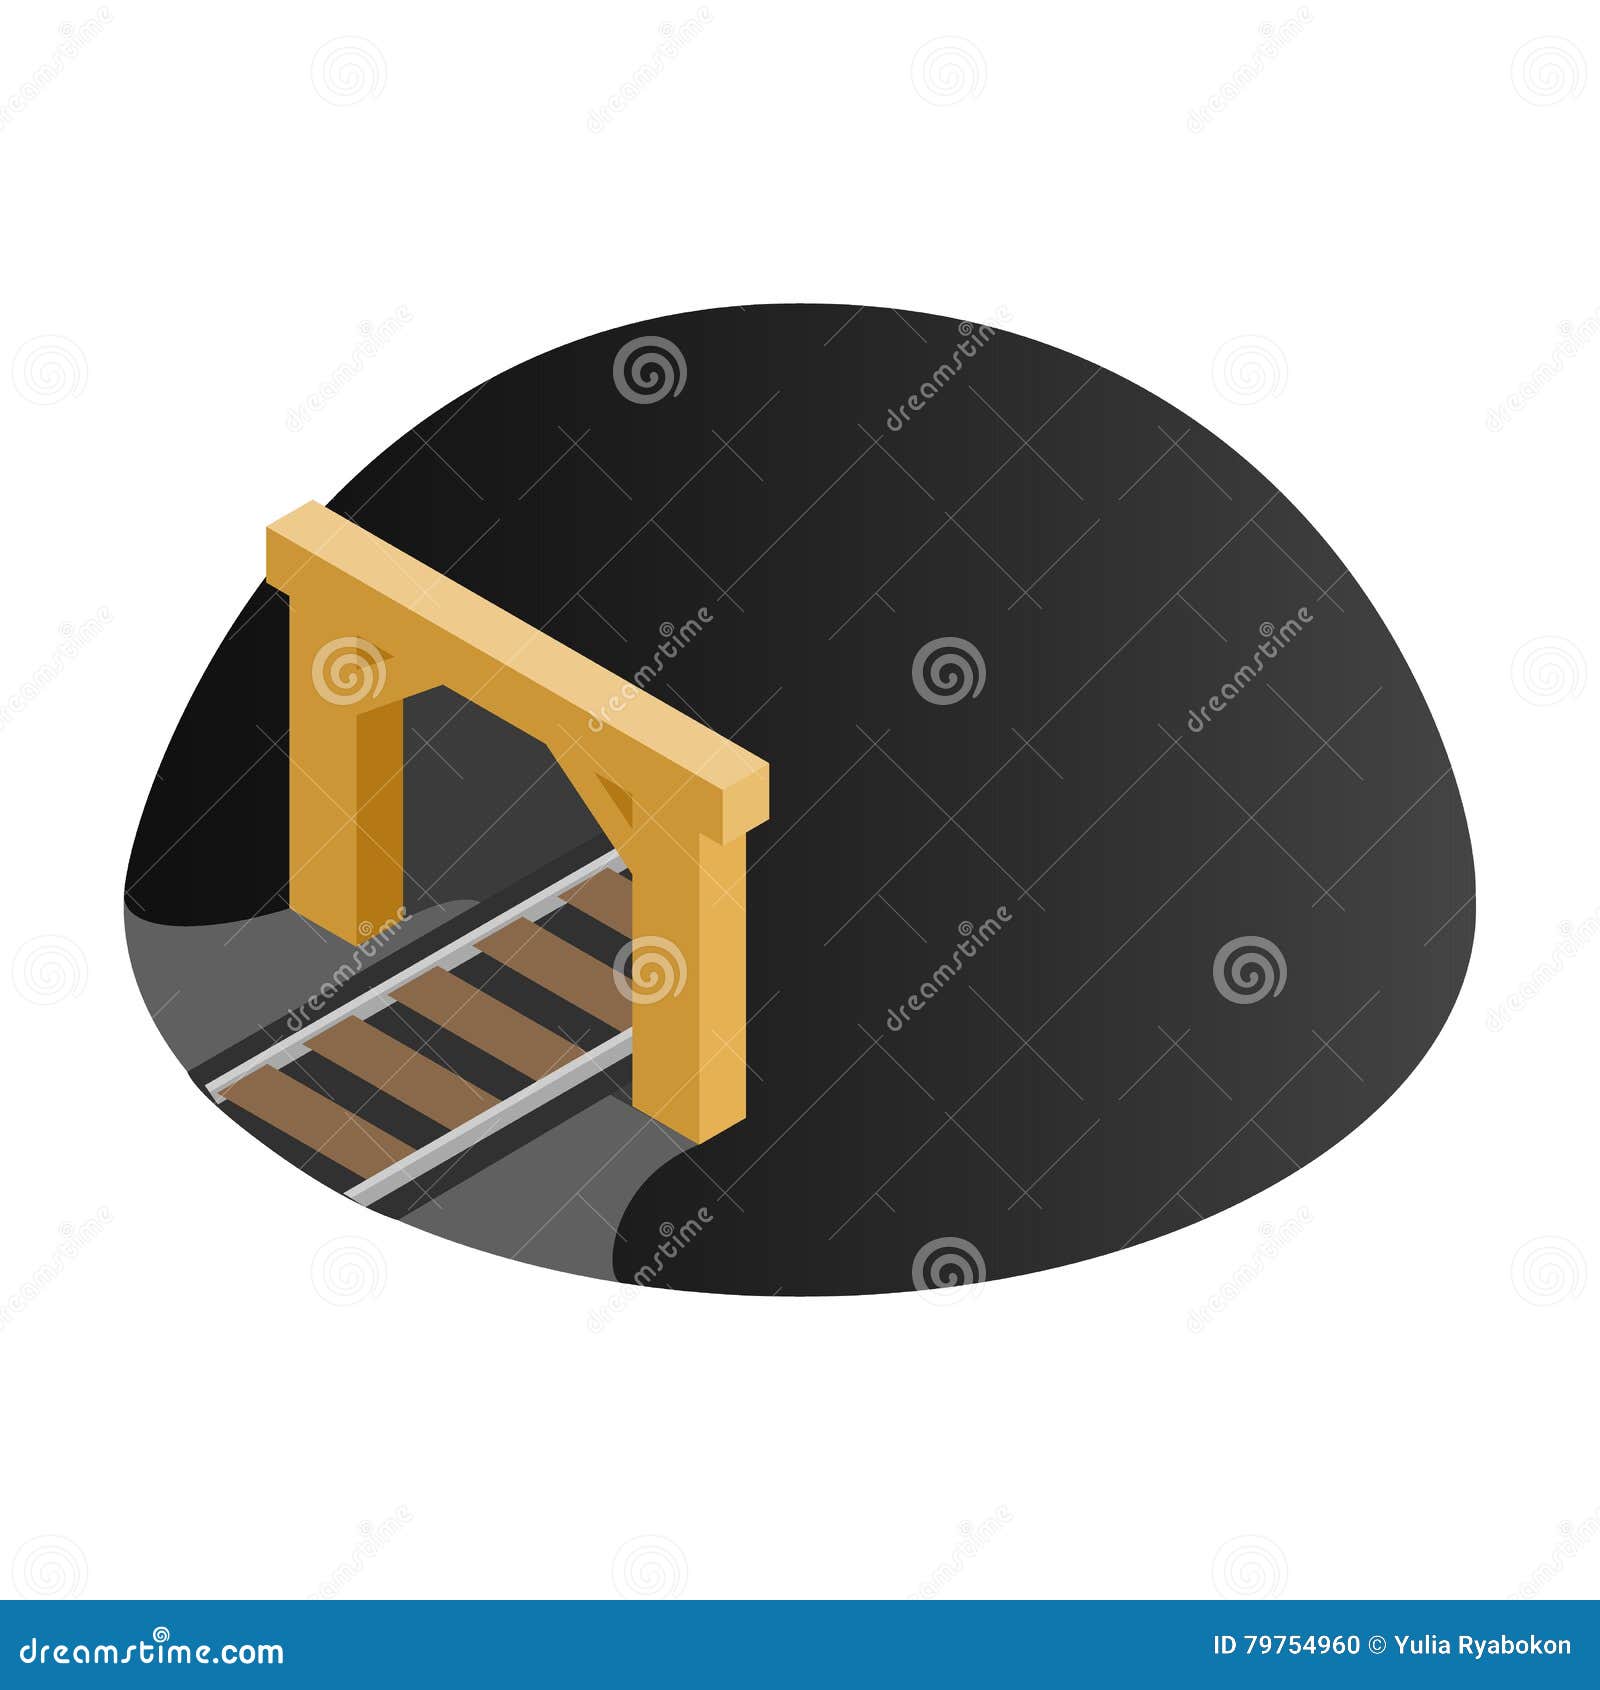 Railway Tunnel 3d Isometric Icon Stock Vector - Illustration of tourism ...